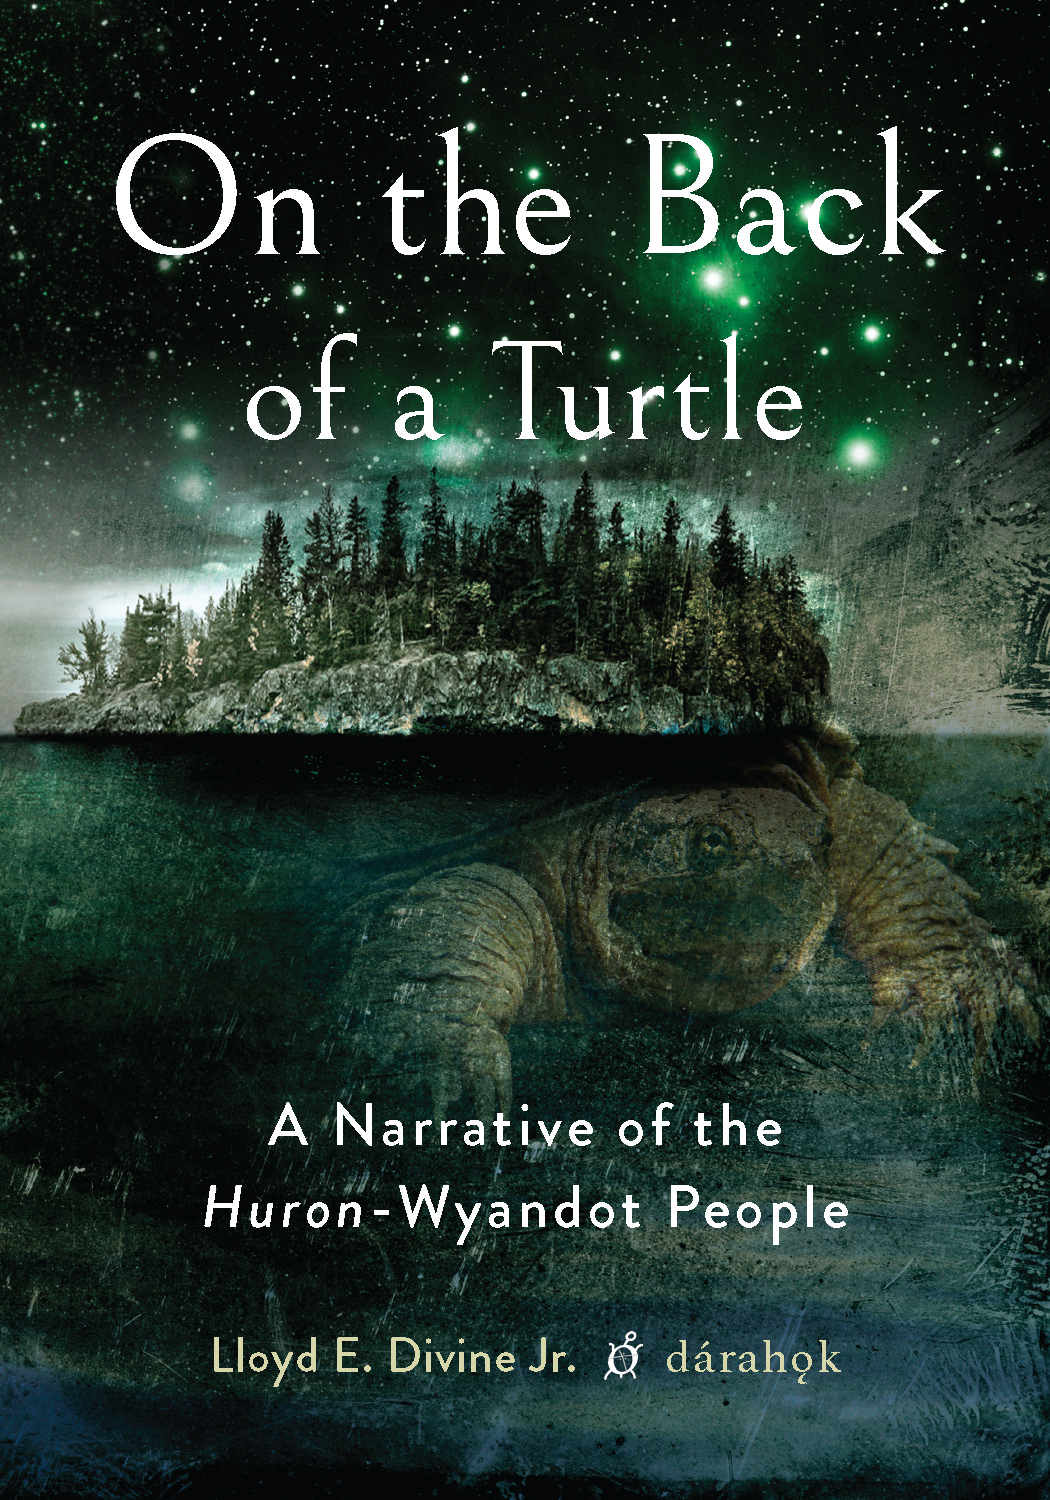 On the Back of a Turtle: A Narrative of the Huron-Wyandot People cover